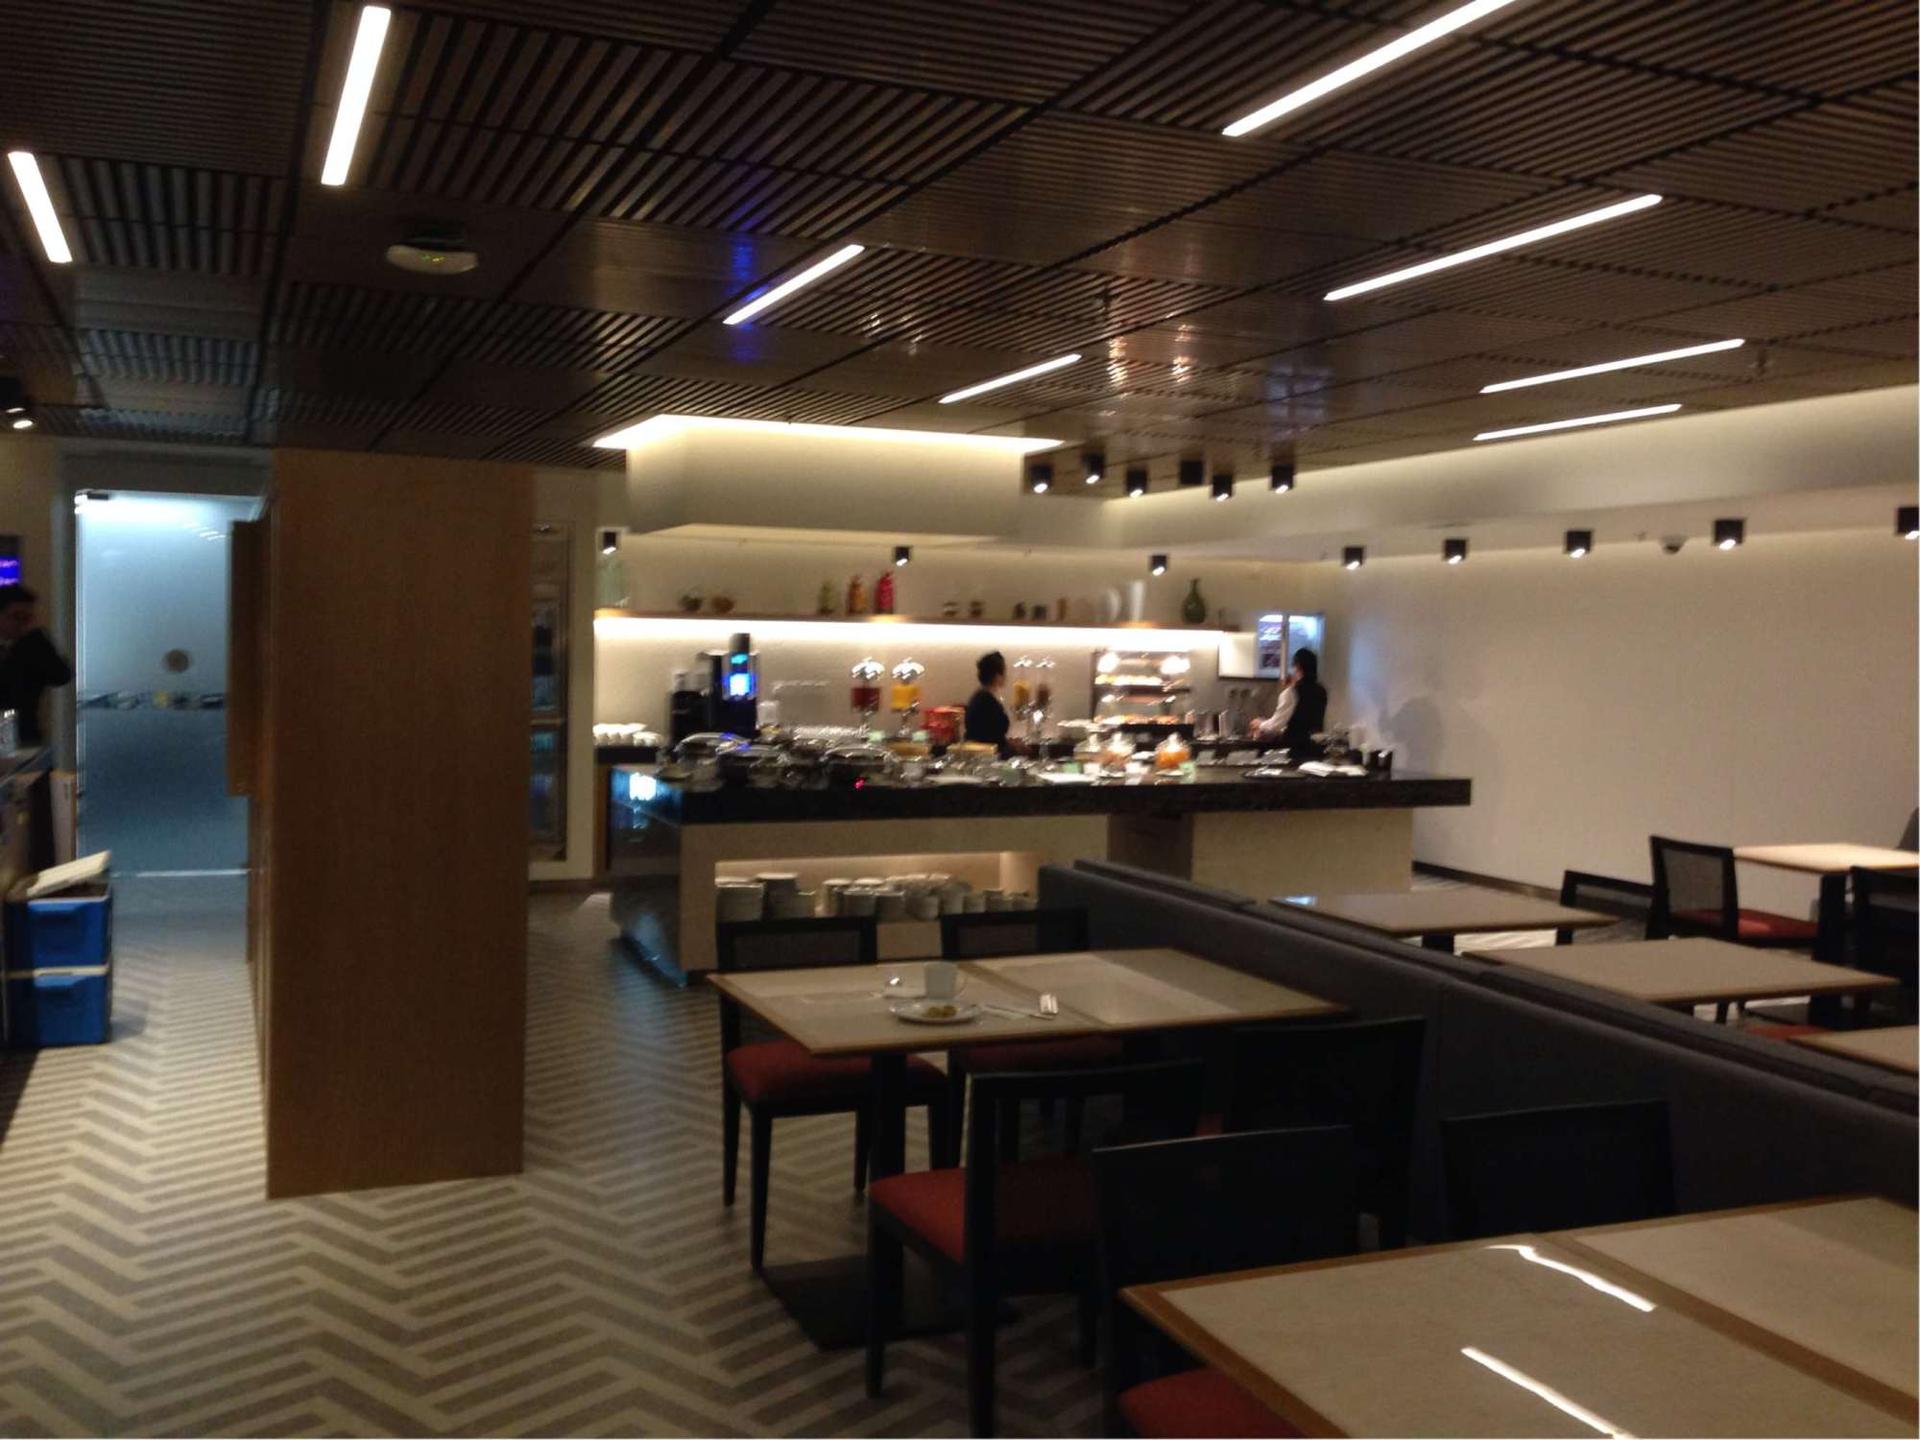 Singapore Airlines SilverKris Business Class Lounge image 19 of 68